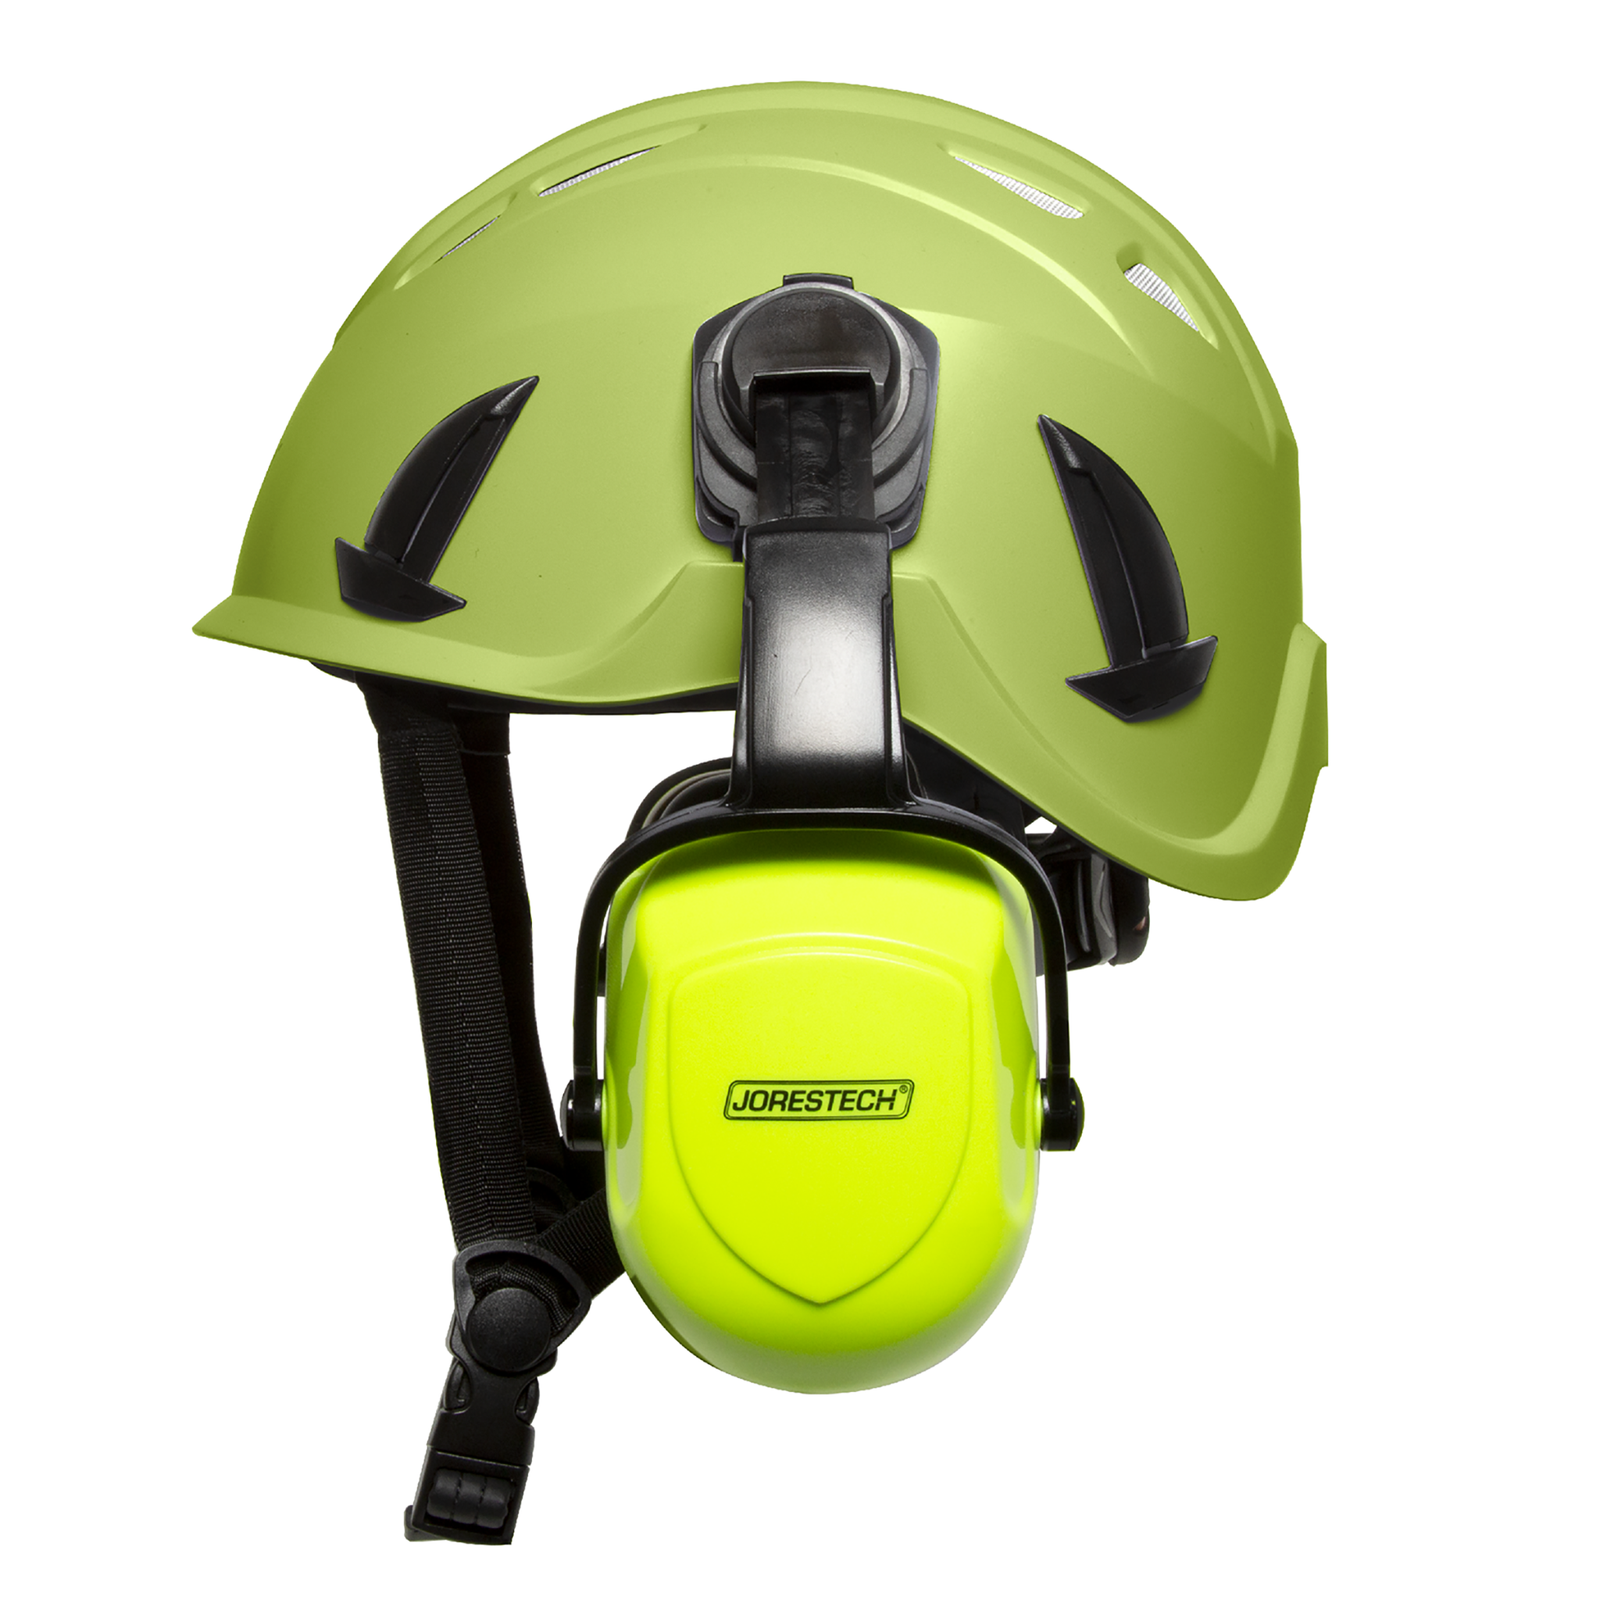 Side view of the lime/green ventilated ANSI hard hat with mounted lime/yellow ear muffs over white background